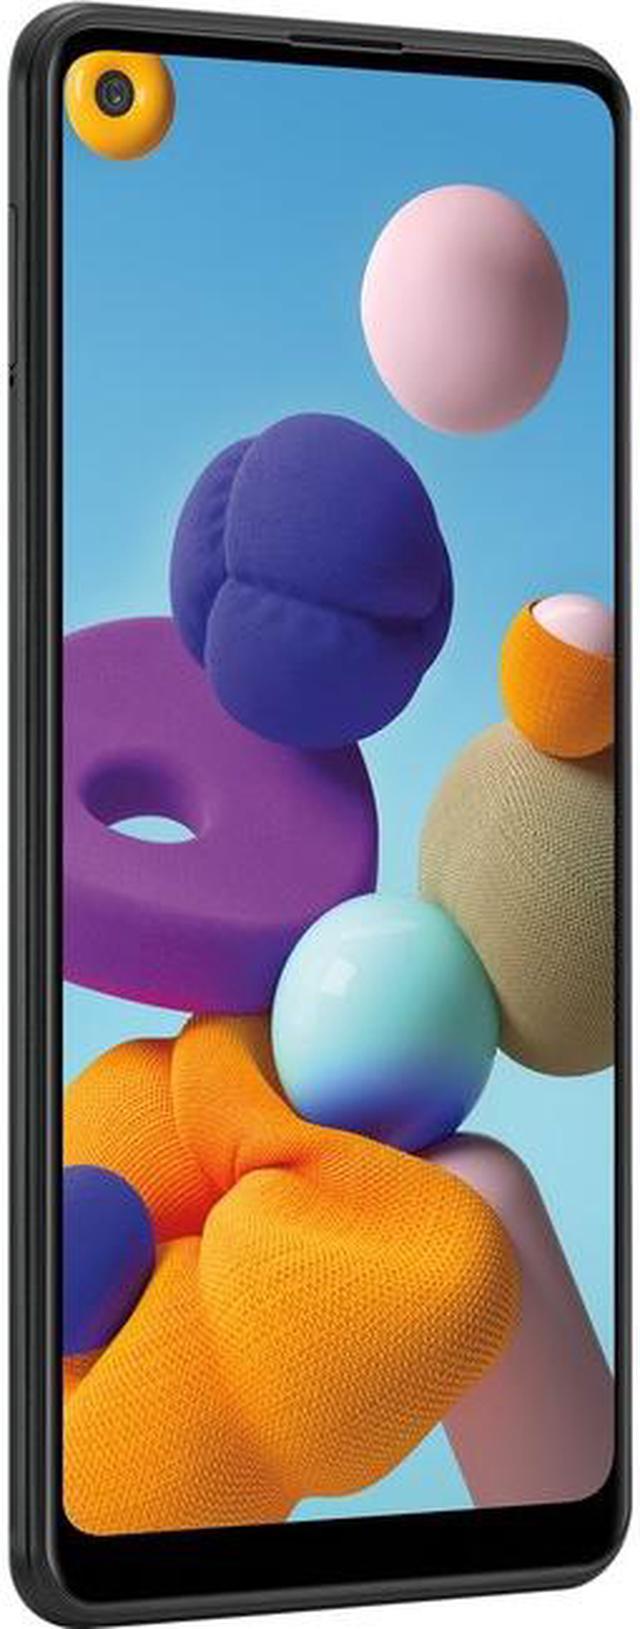 Samsung Galaxy A21 Factory Unlocked Android Cell Phone